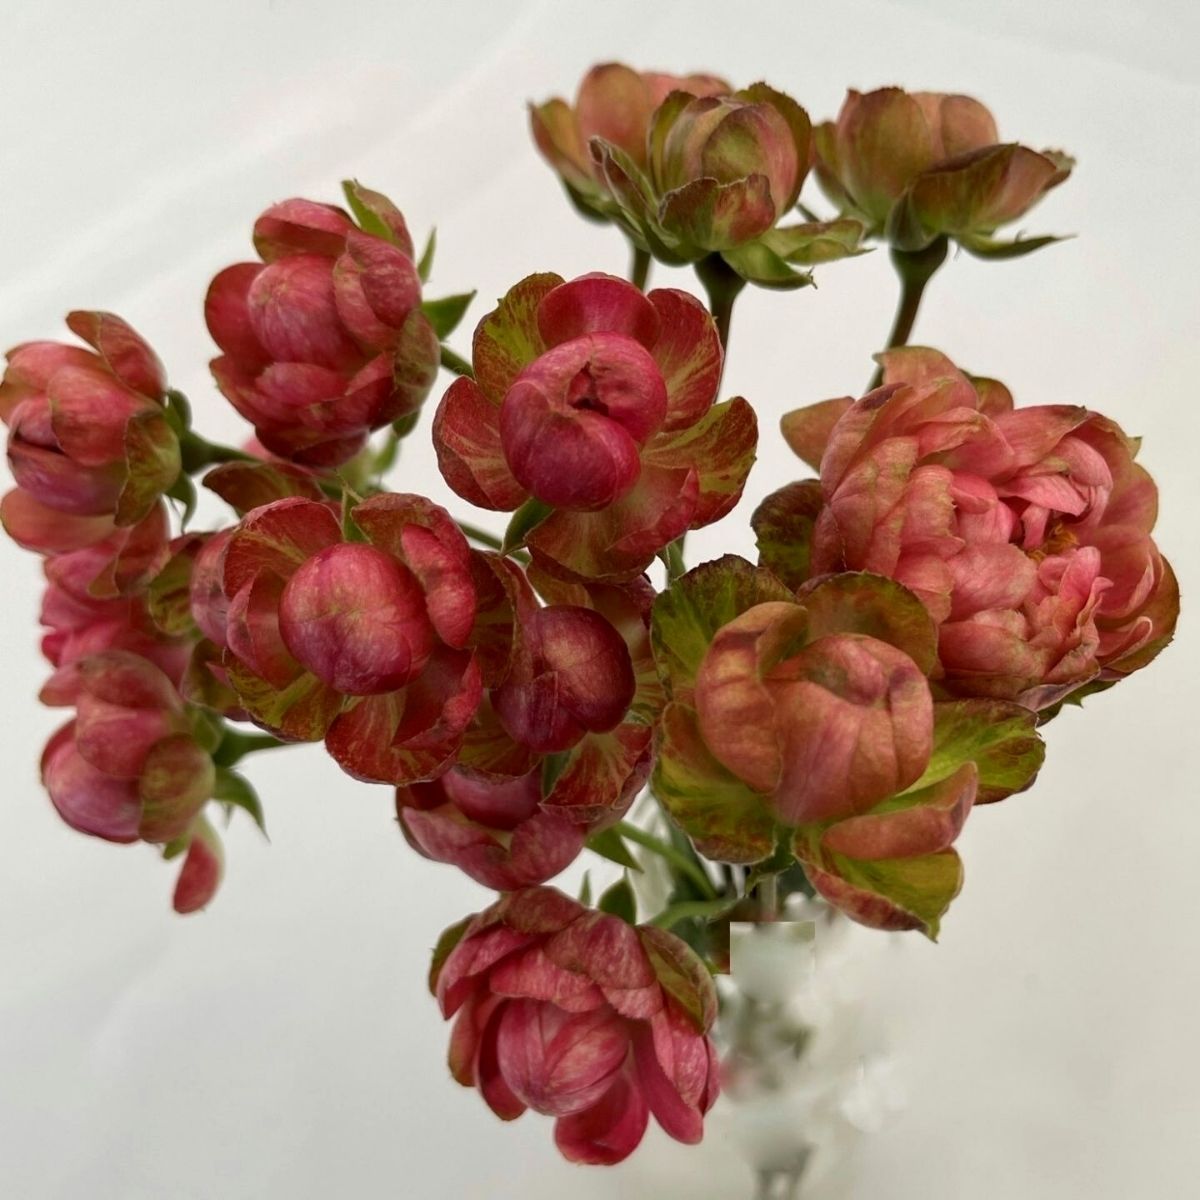 alexandra-farms-introduces-new-garden-rose-varieties-to-diverse-collections-featured